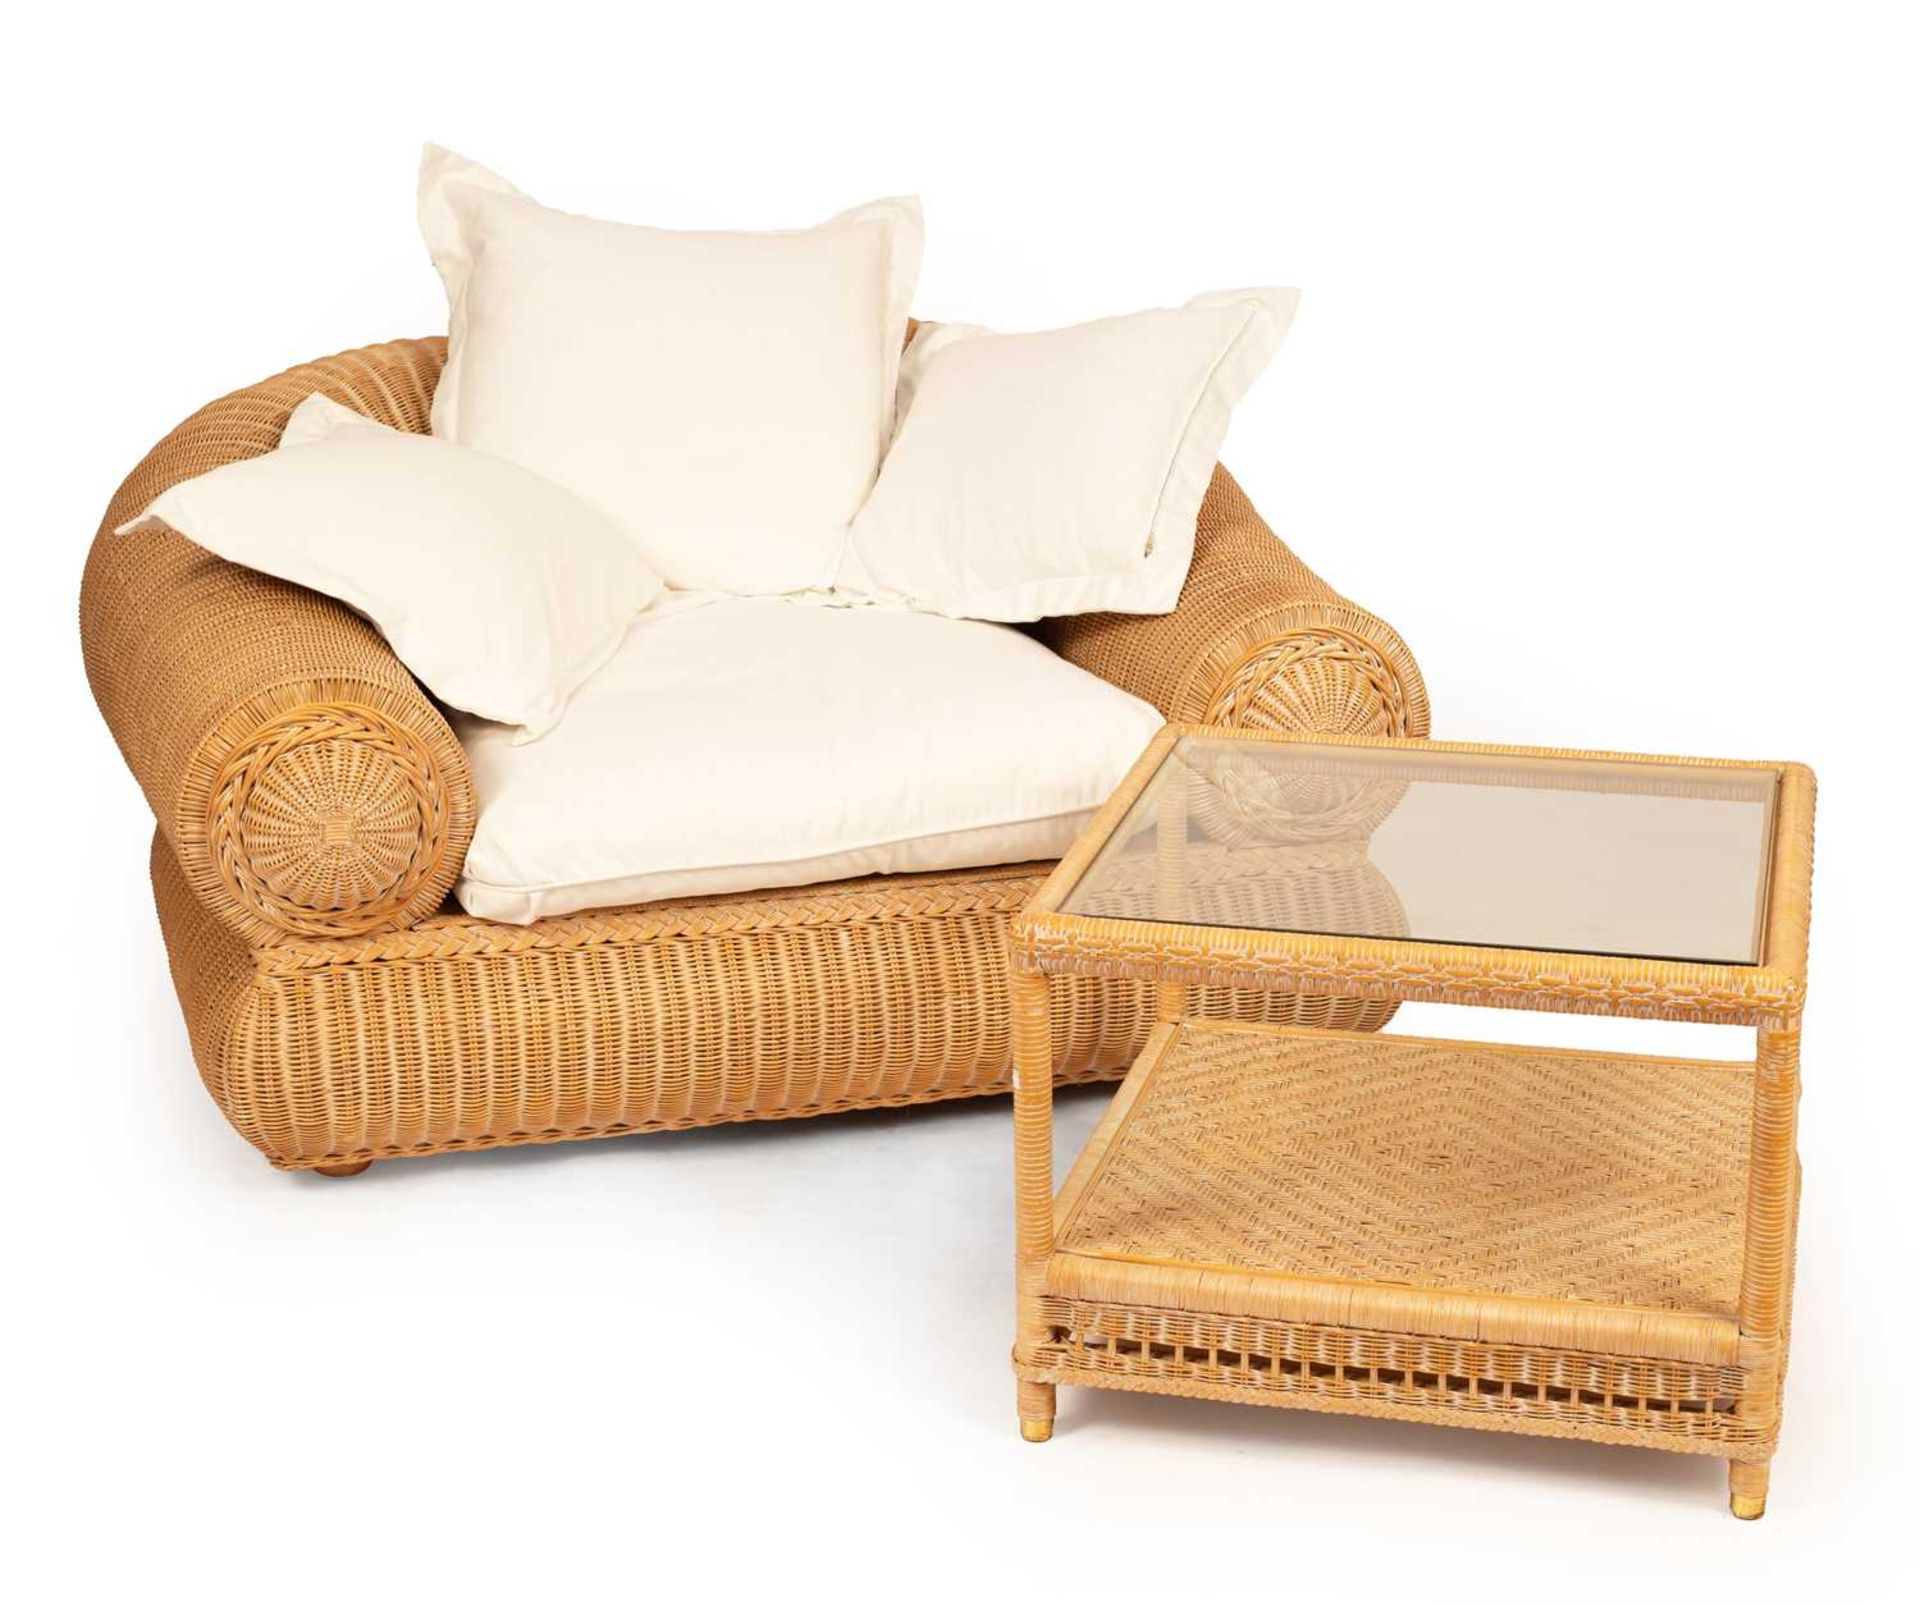 POINT FURNITURE - MODERNIST RATTAN ARMCHAIRS & TABLES - Image 2 of 5